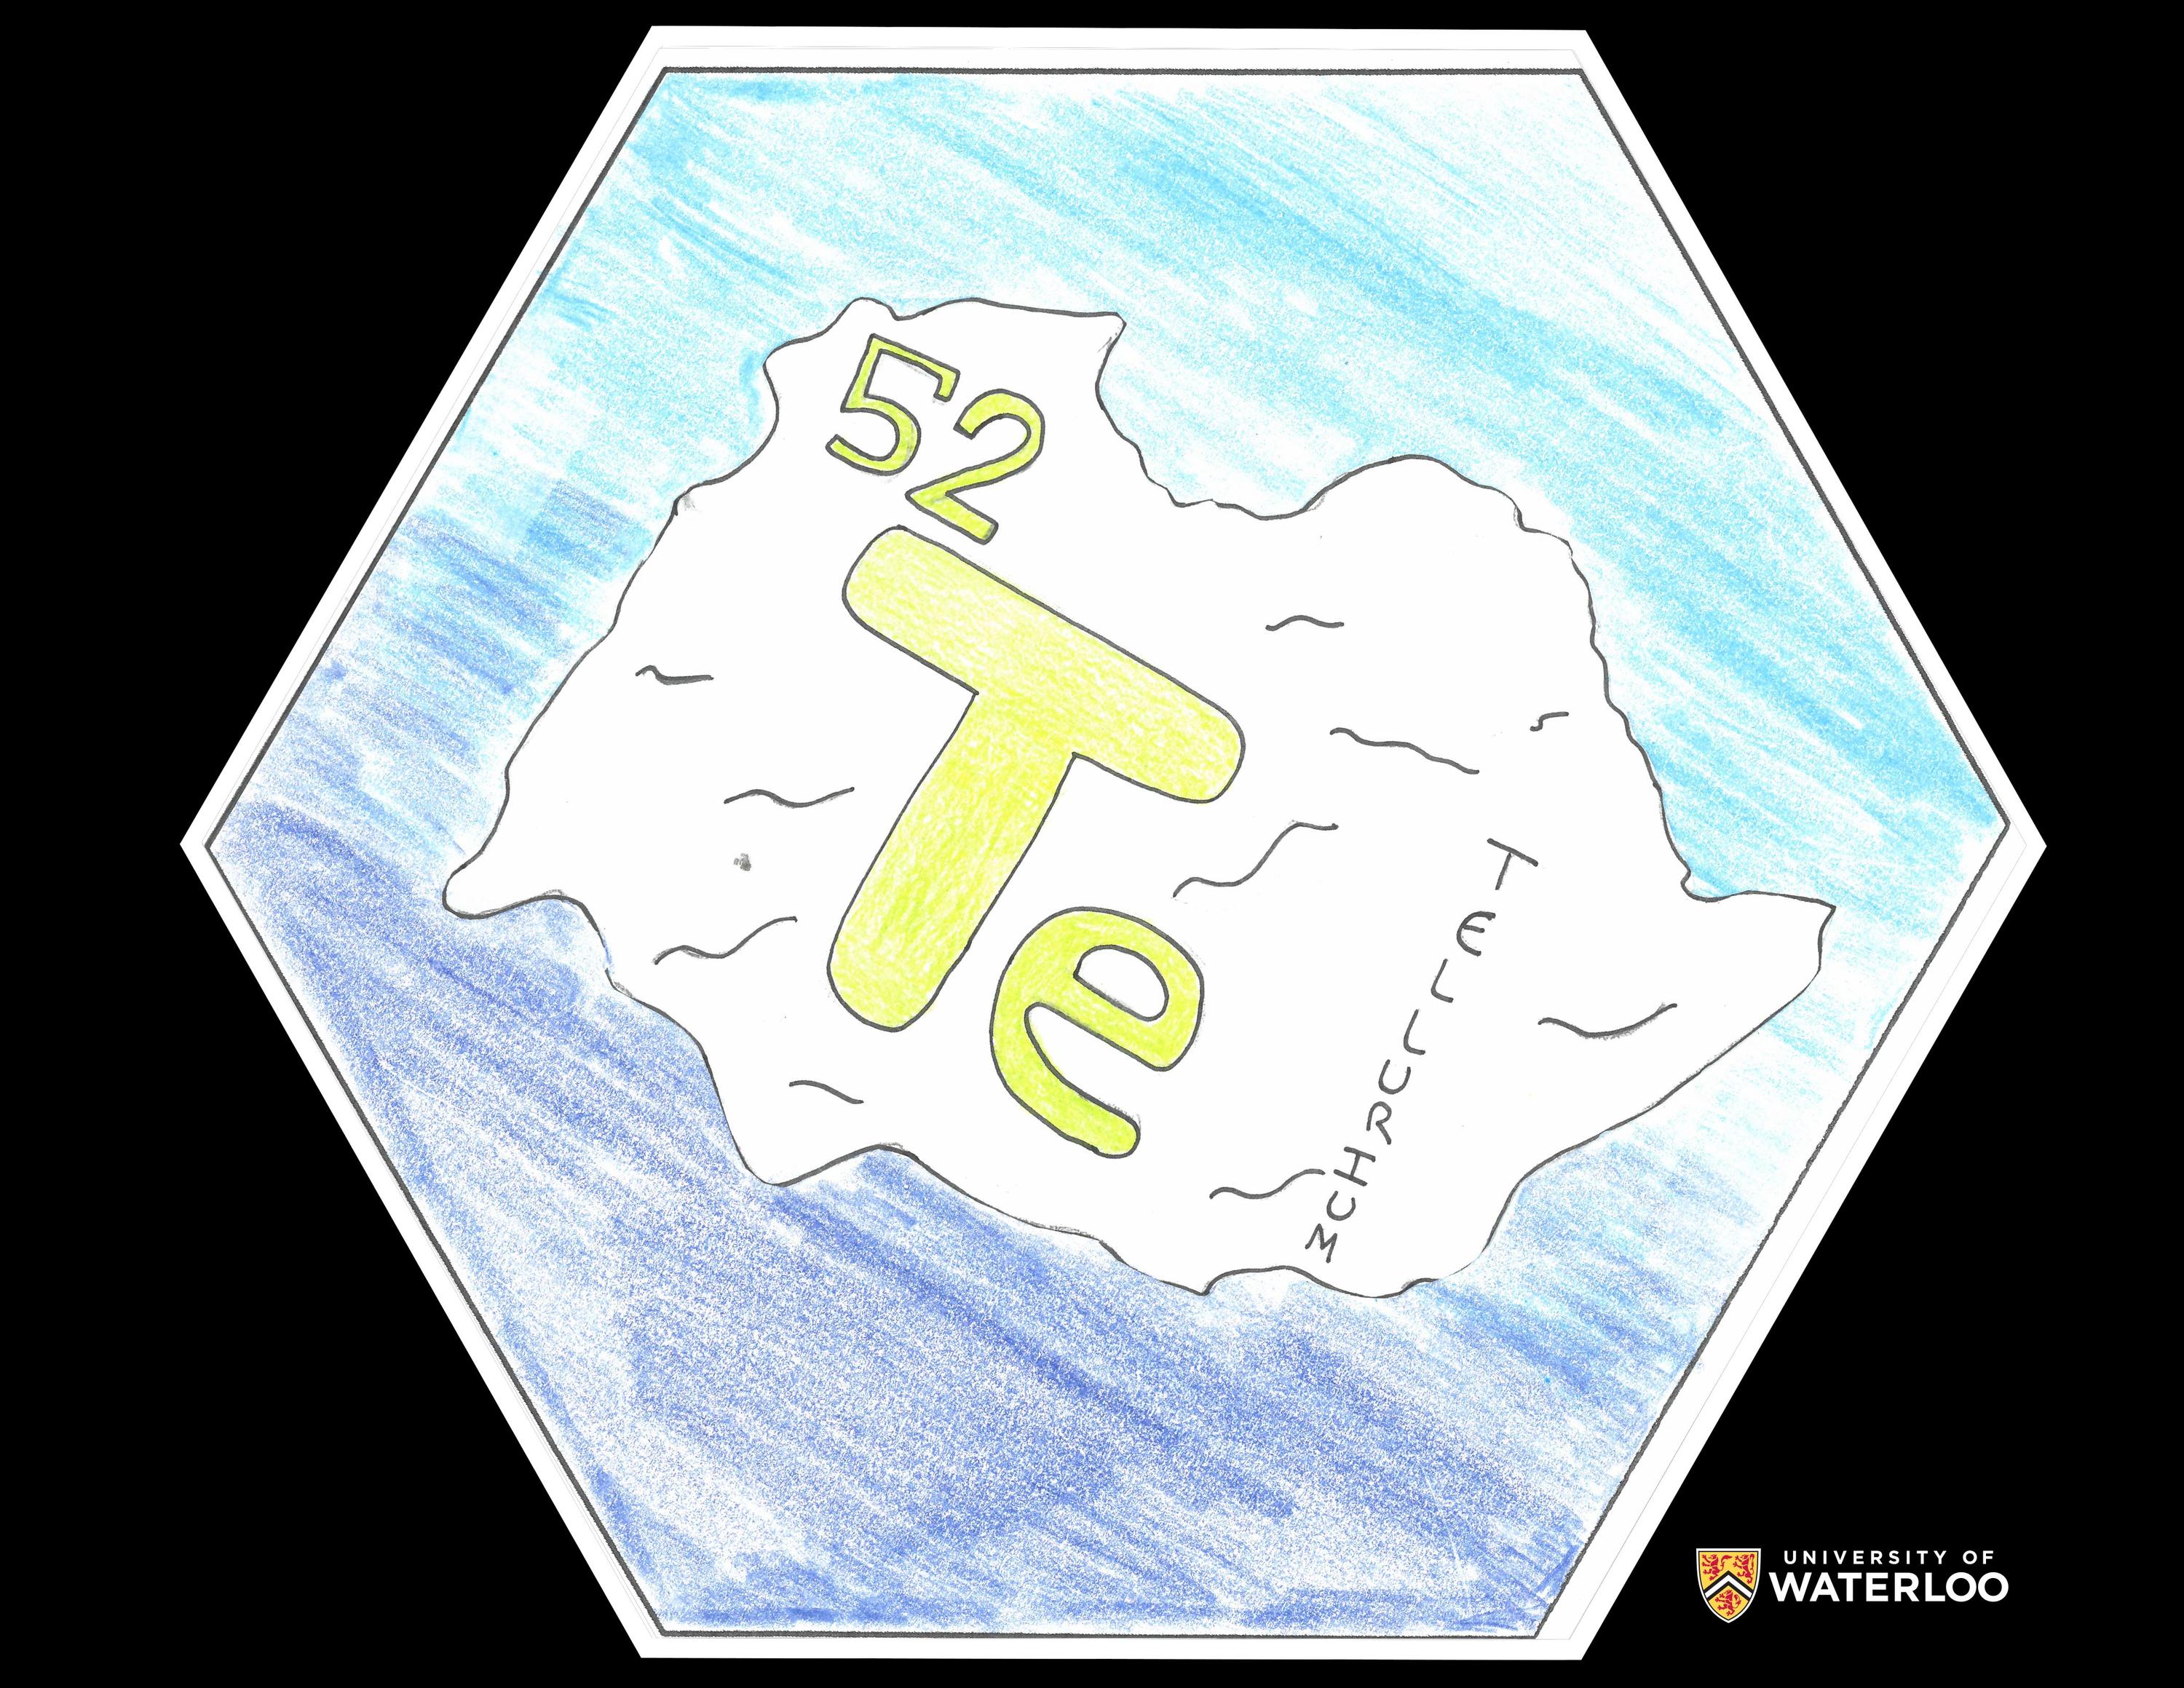 Coloured pencil and ink on white paper. Chemical symbol “Te” and atomic number “52” in yellow lettering appear with “Tellurium” over a picture of what the element tellurium looks like.